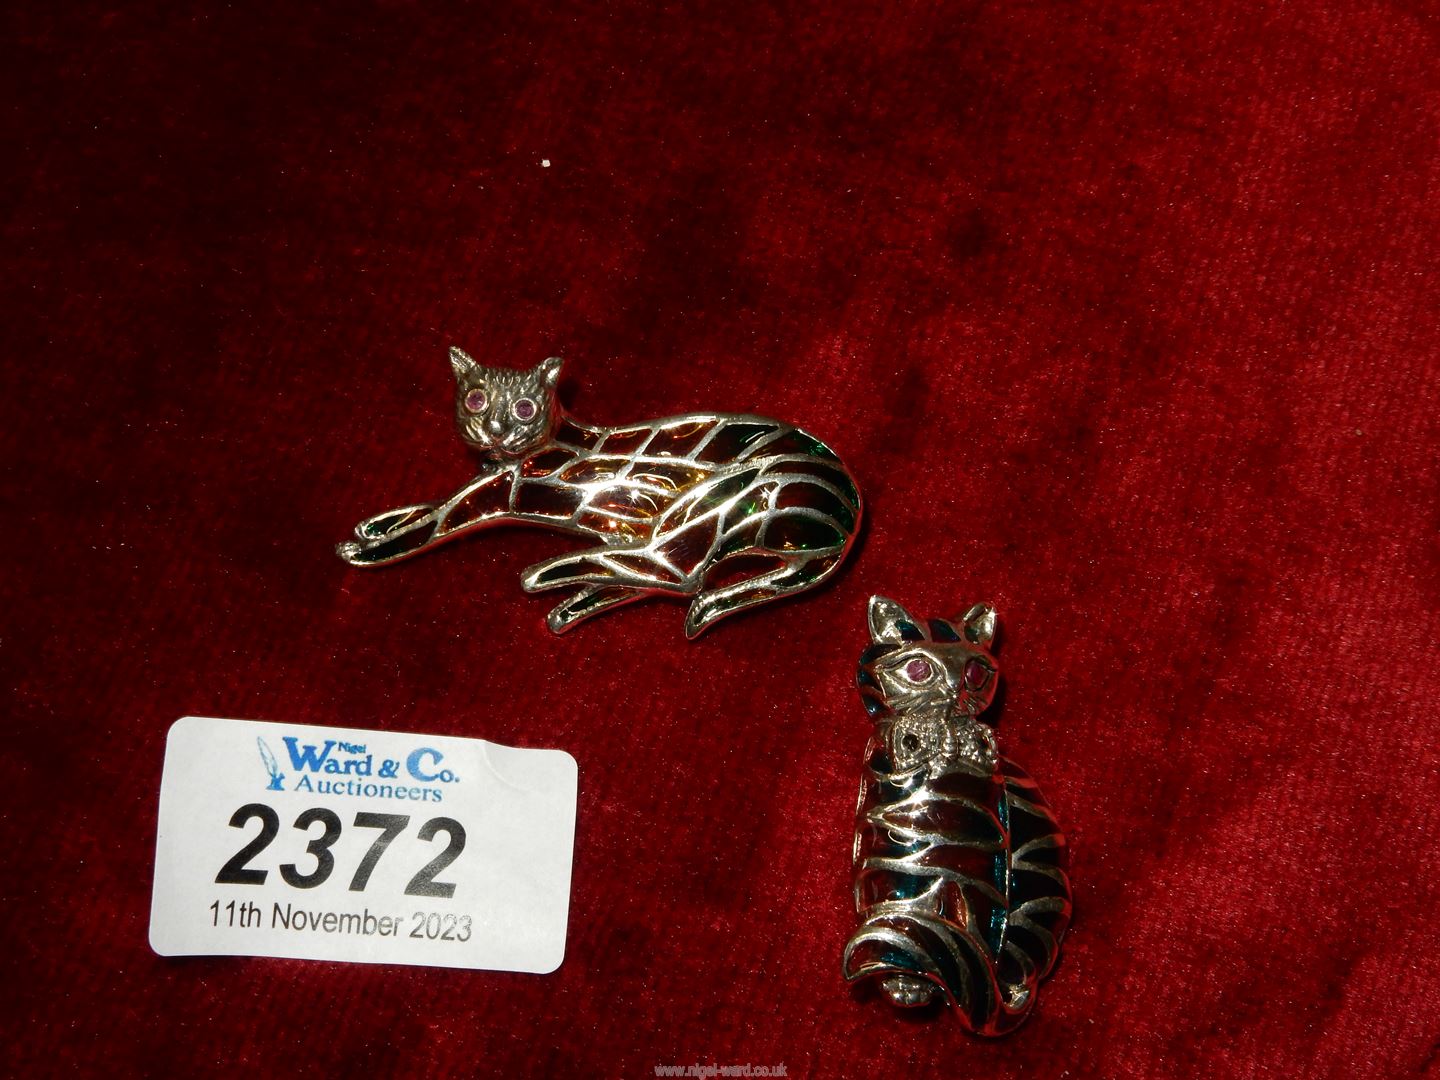 Two 925 silver and enamel hallmarked "Cat" brooches. - Image 3 of 3